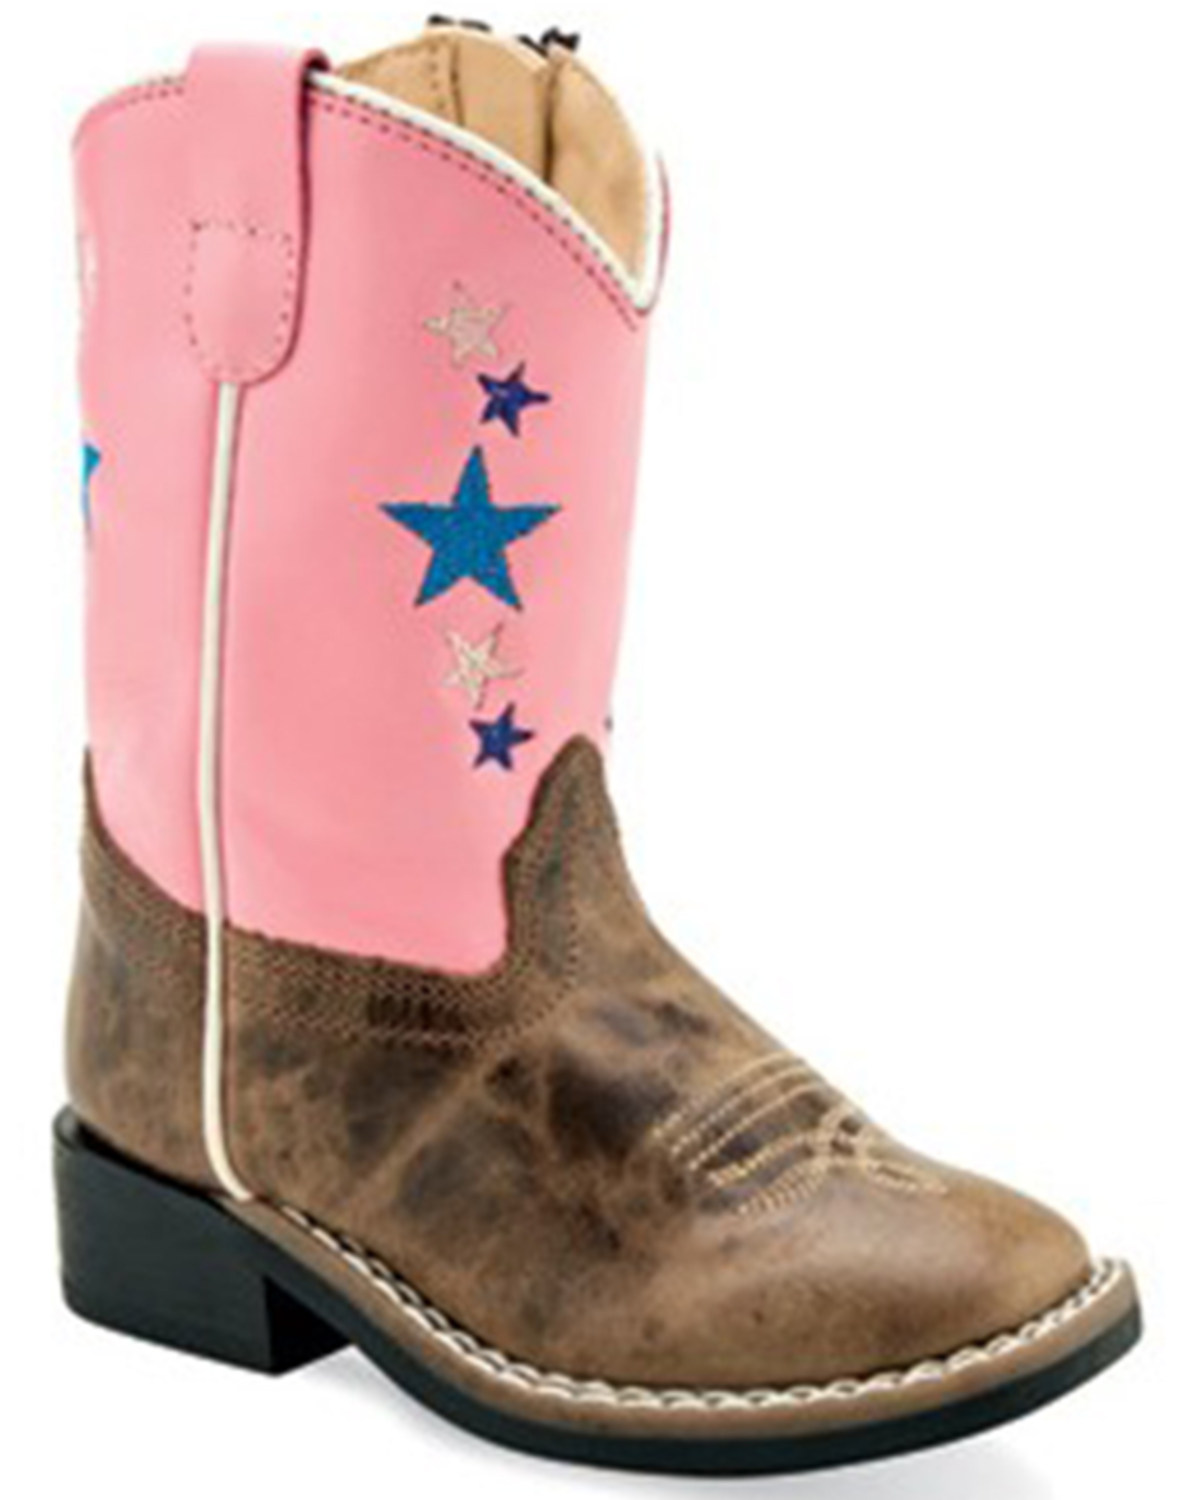 Old West Toddler Girls' Stars Western Boots - Broad Square Toe